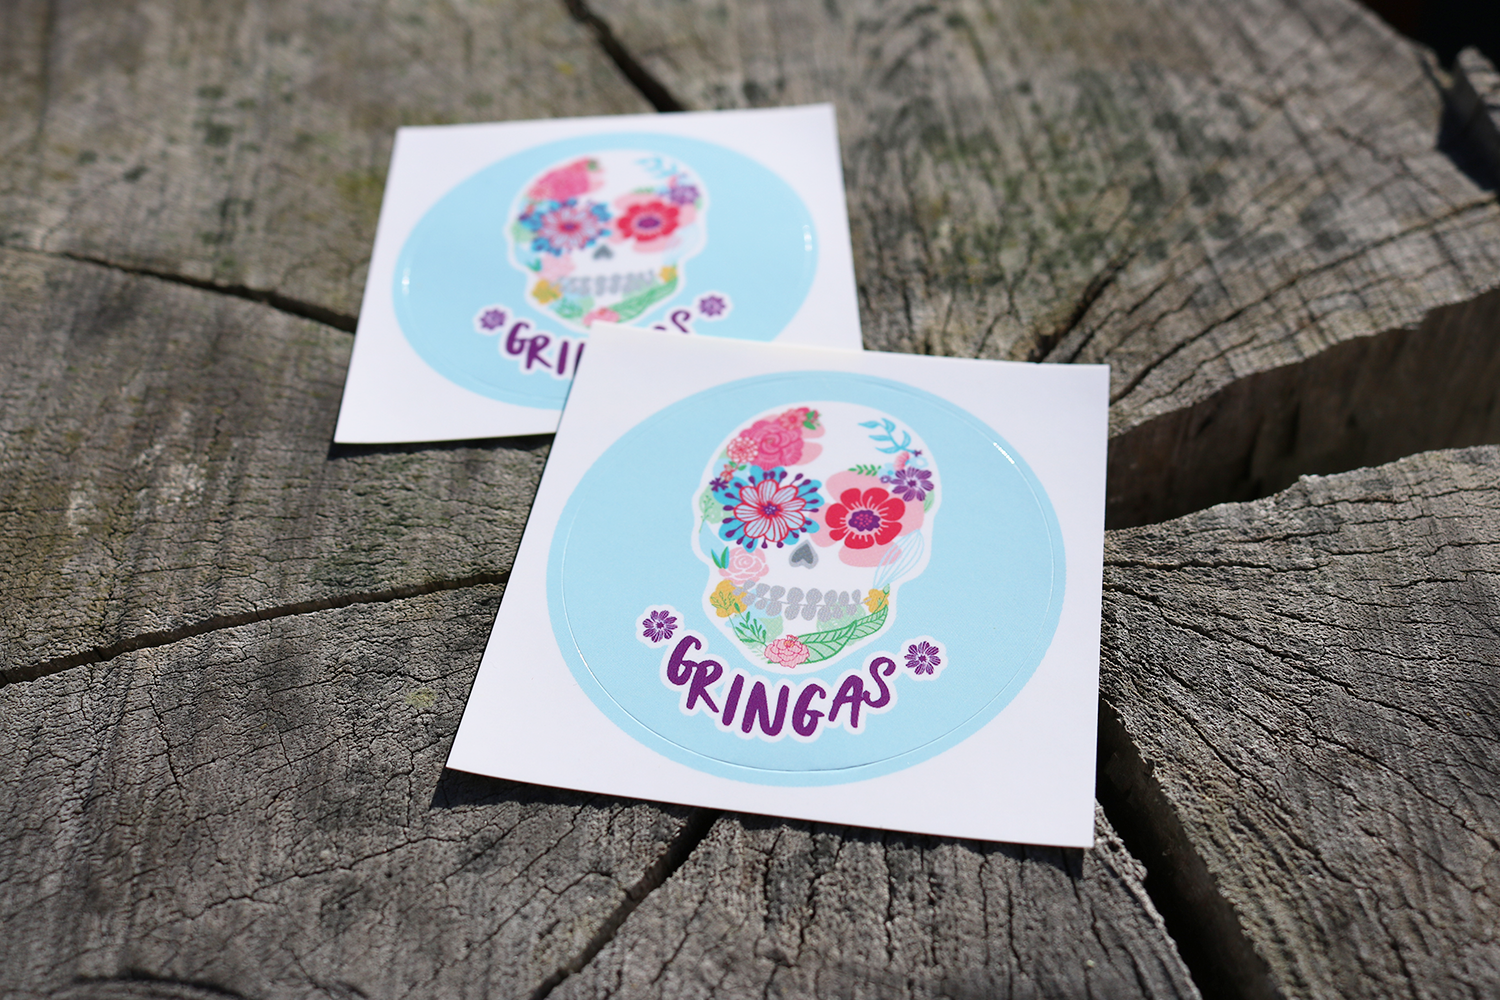 Gringas Stickers